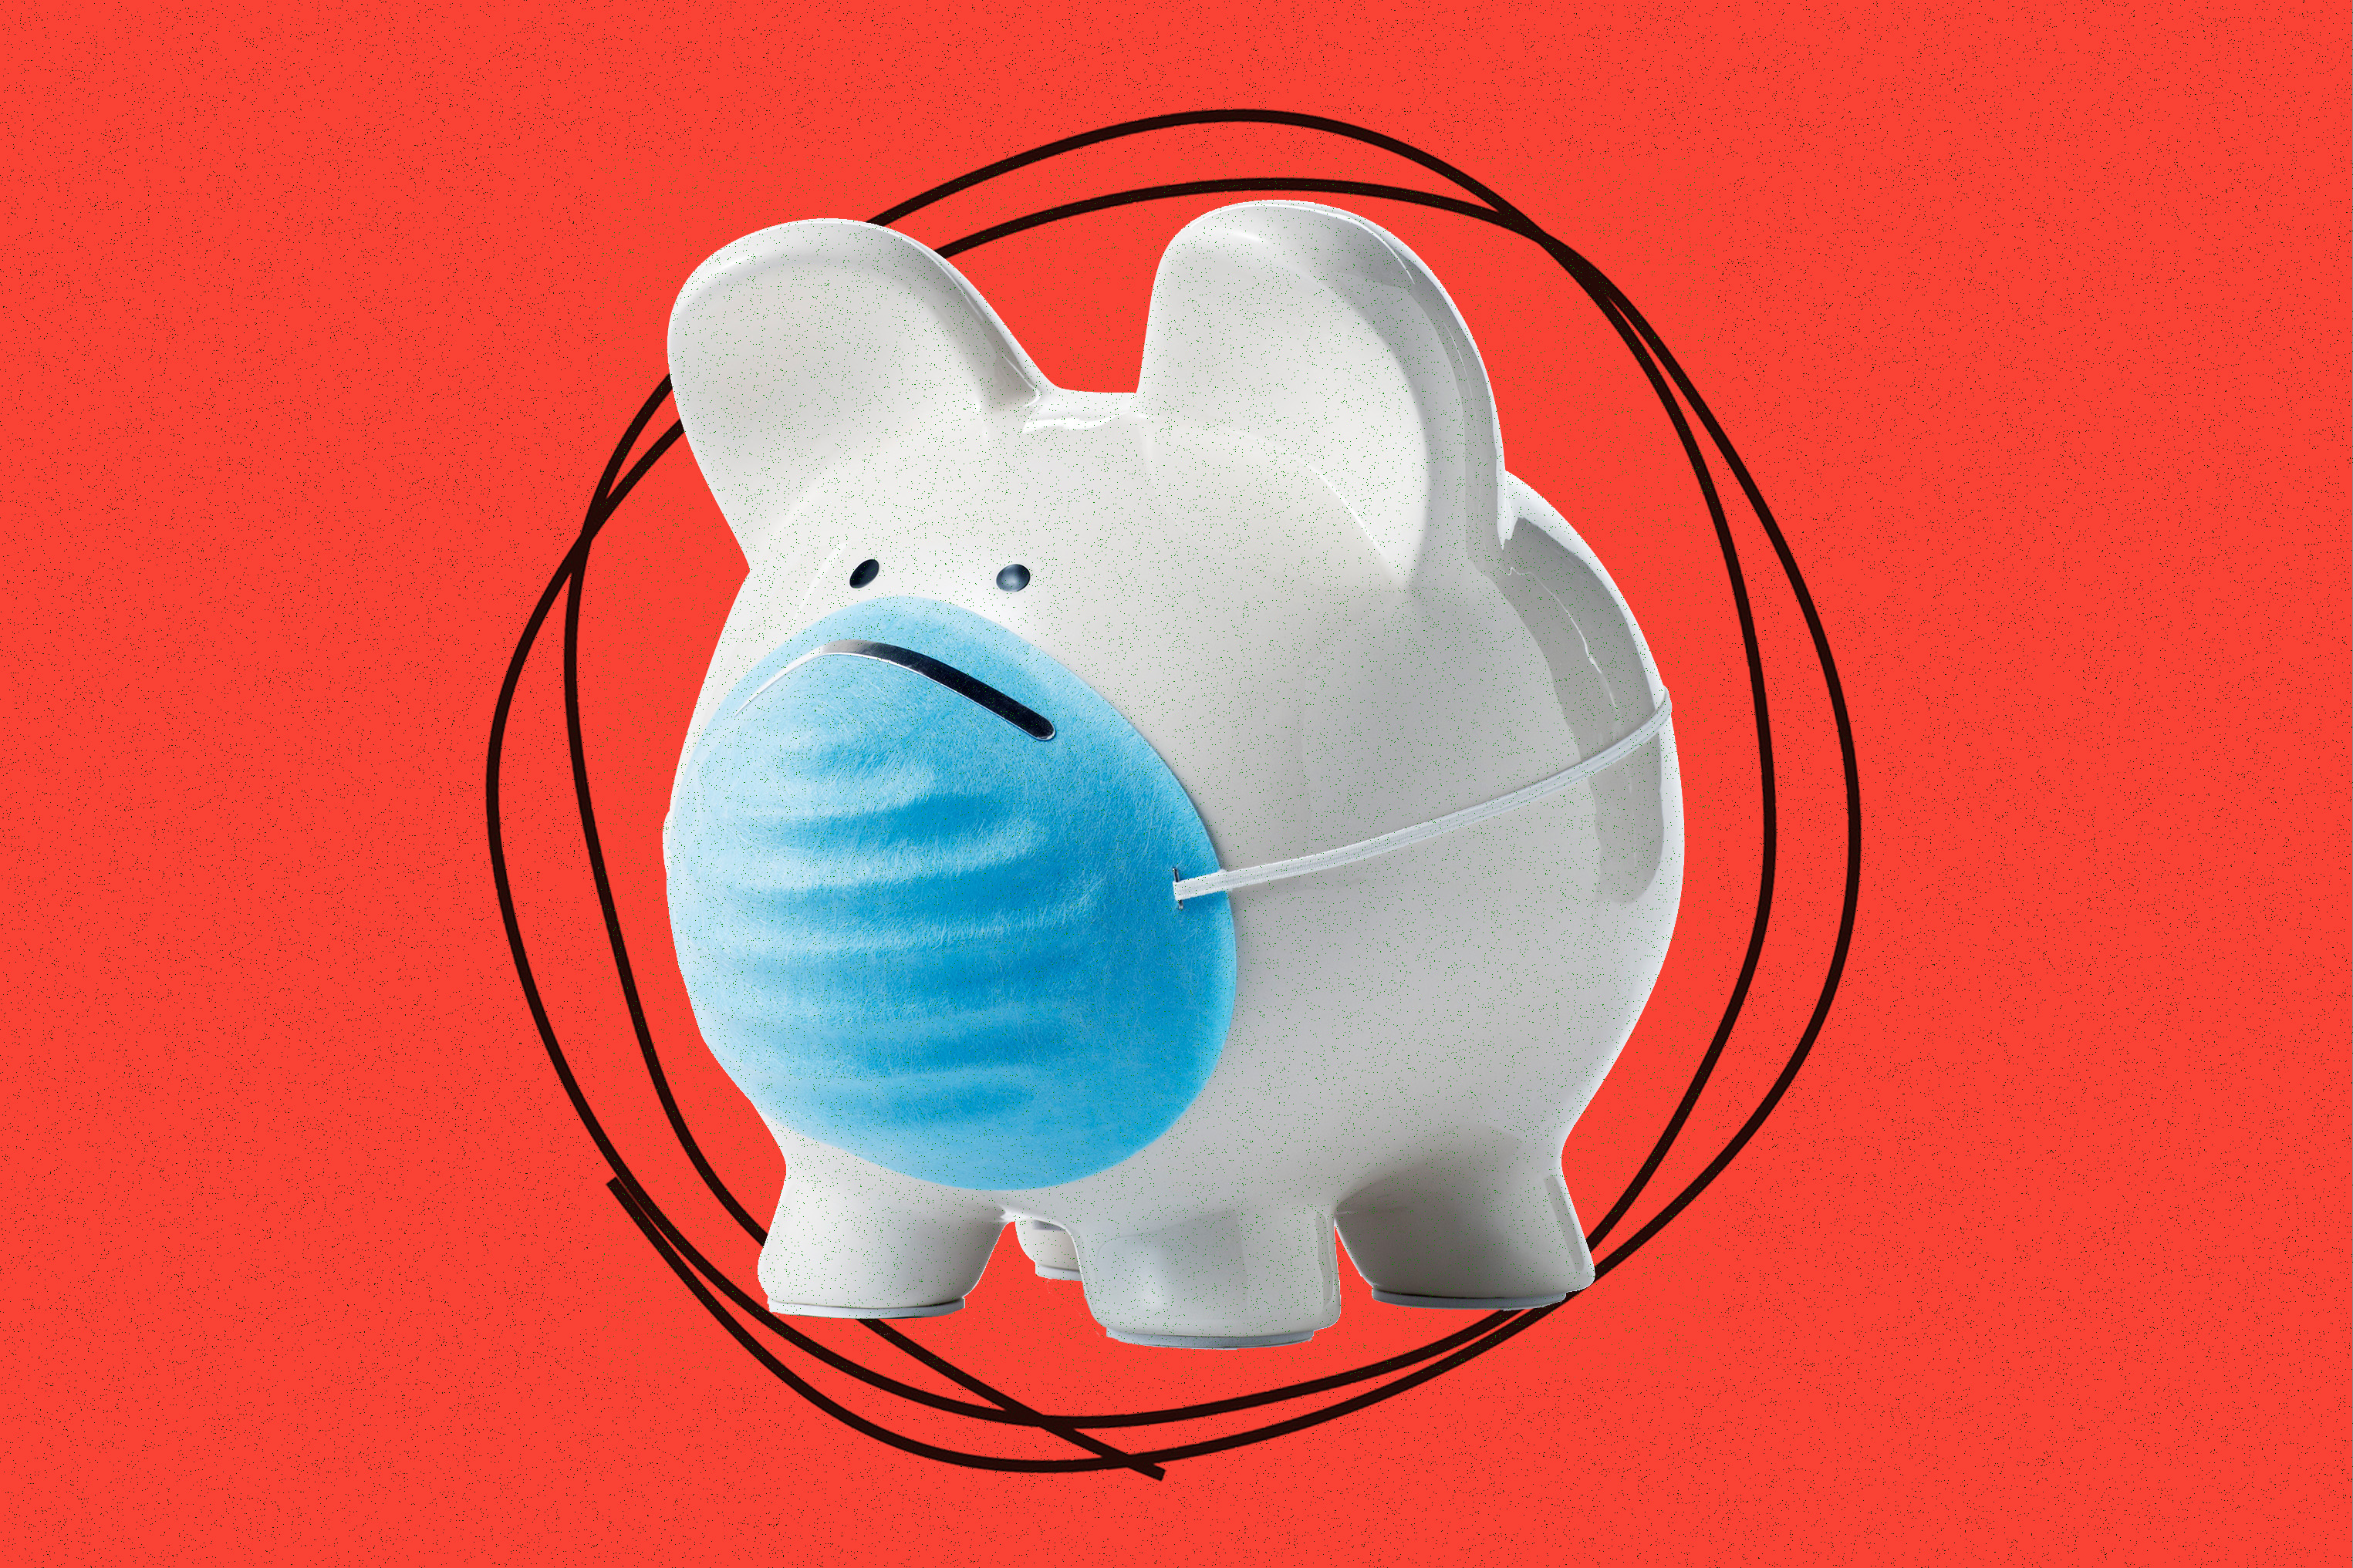 An image of a cute round piggy bank with a blue mask over its little mouth and snout.